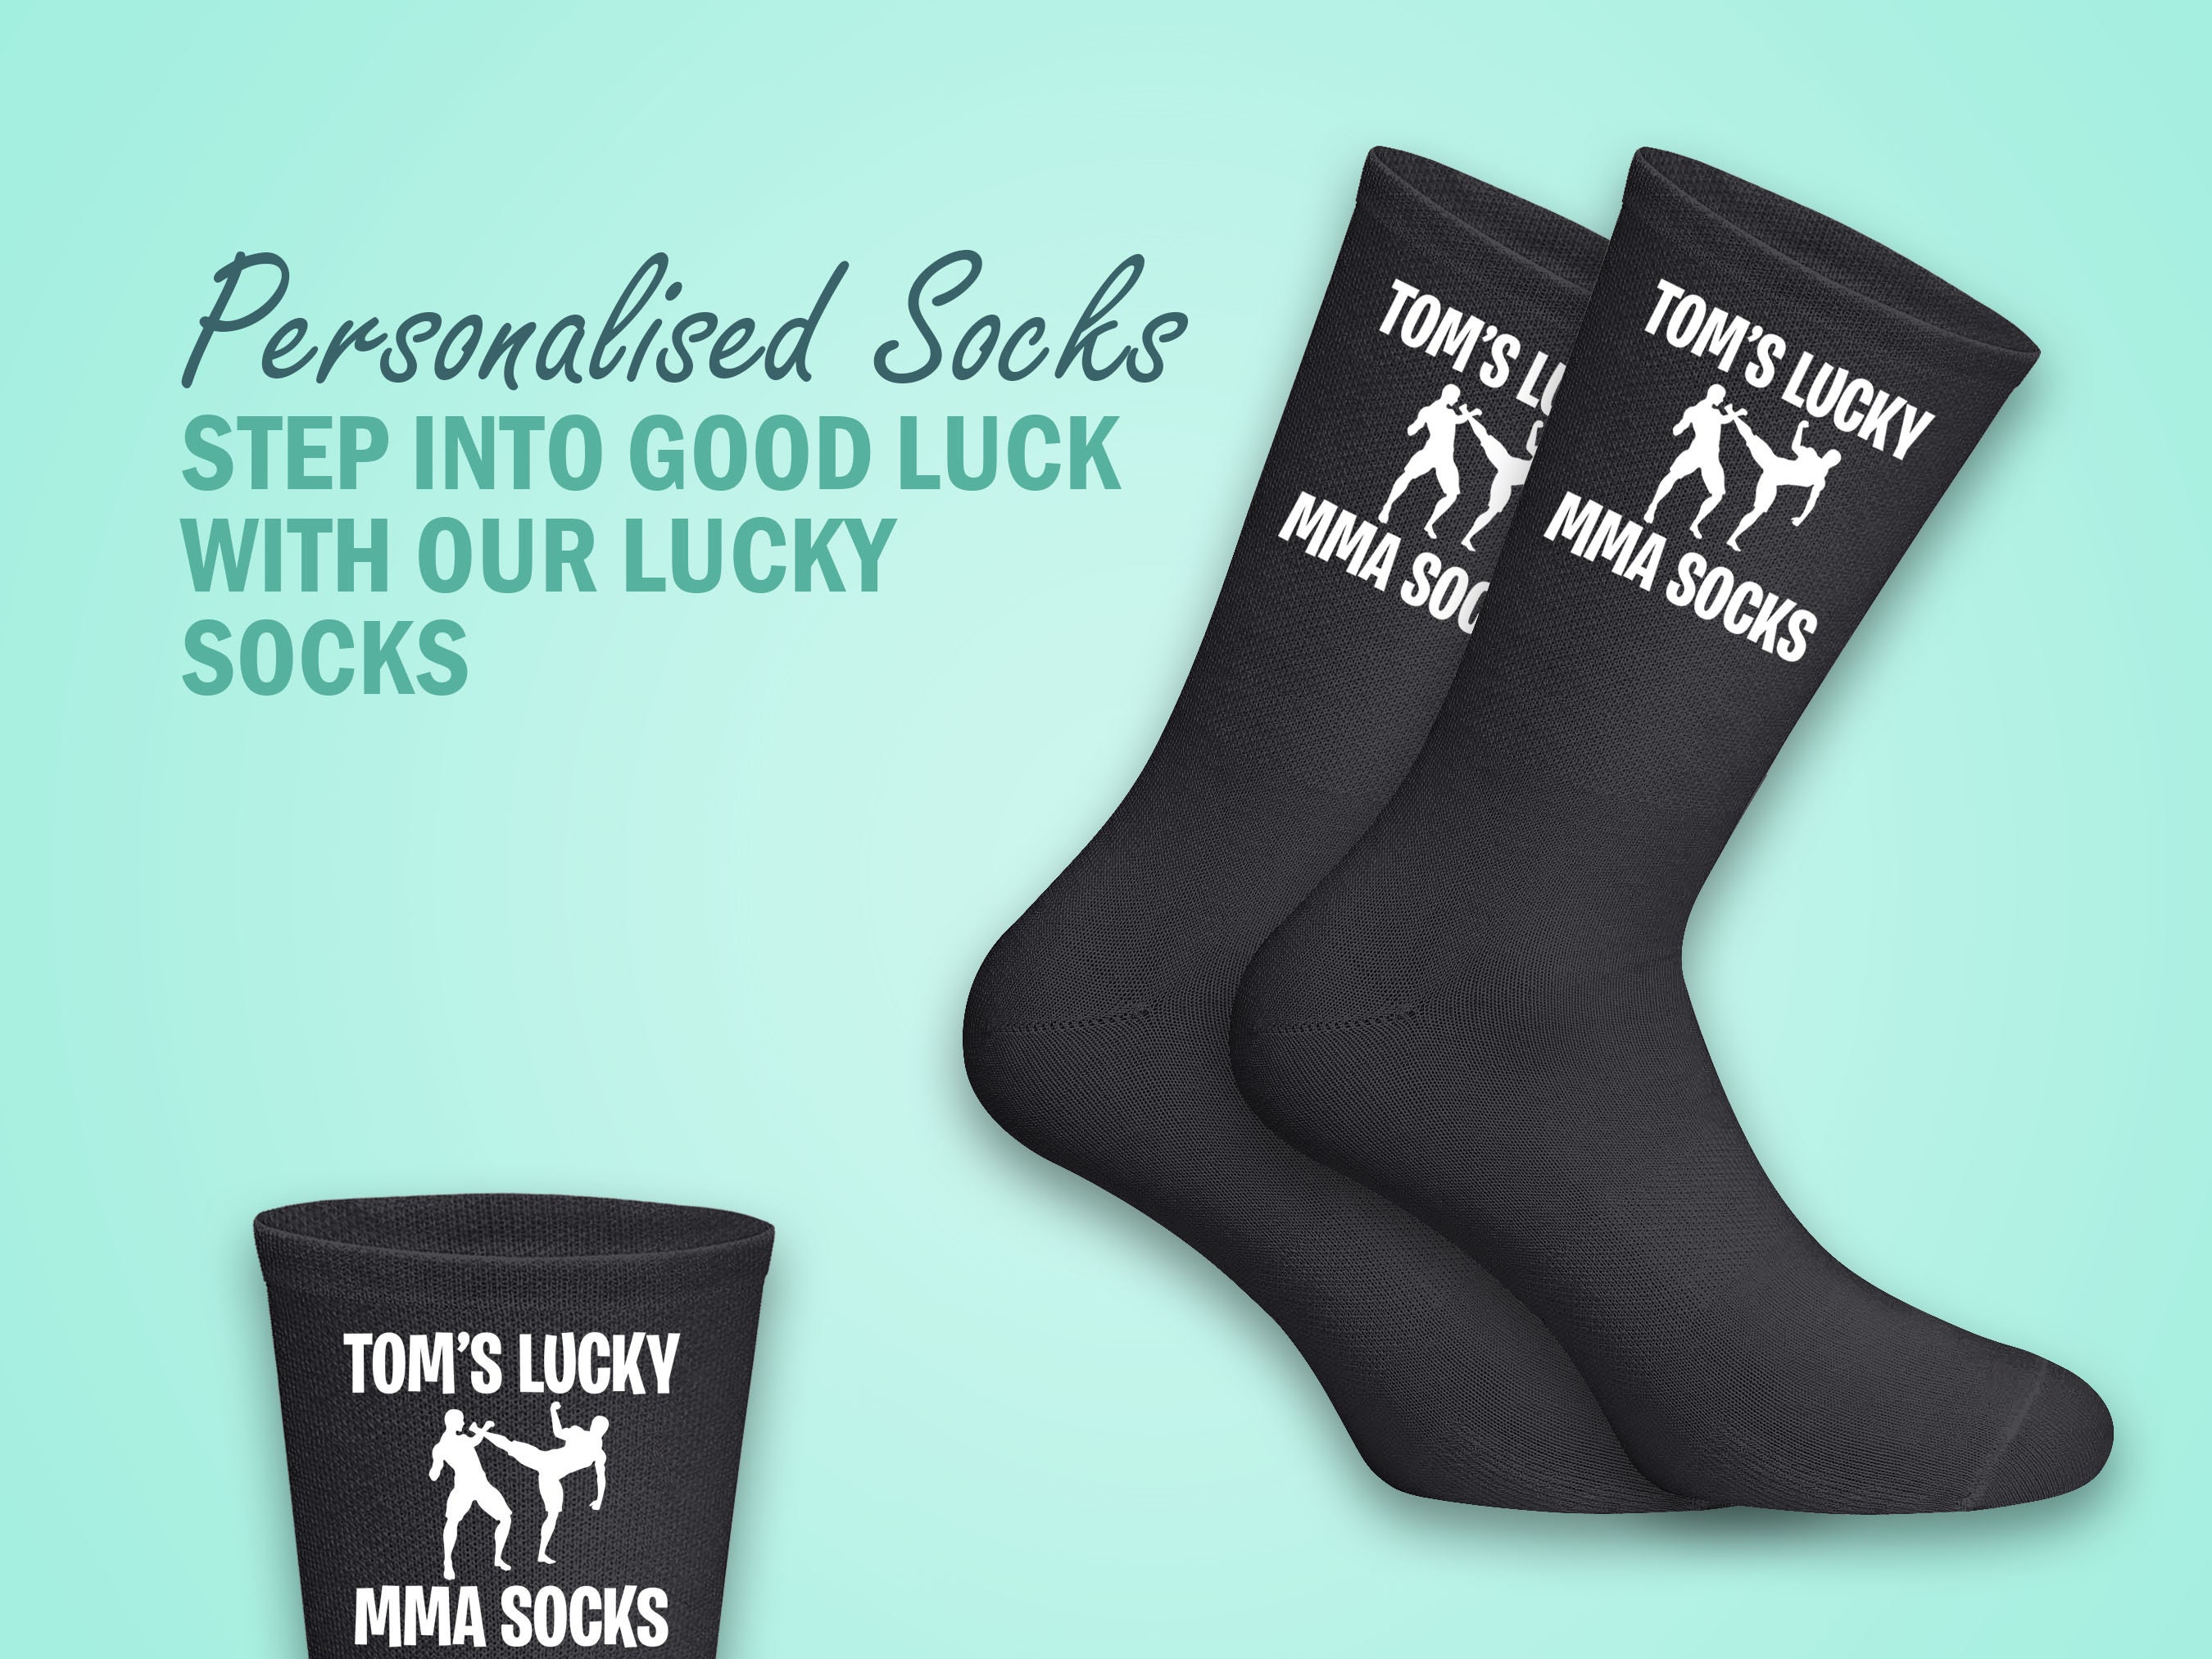 Customised Lucky MMA Socks Personalised With Your Name for a Winning Look  Perfect Gift for MMA or Martial Arts Fans 